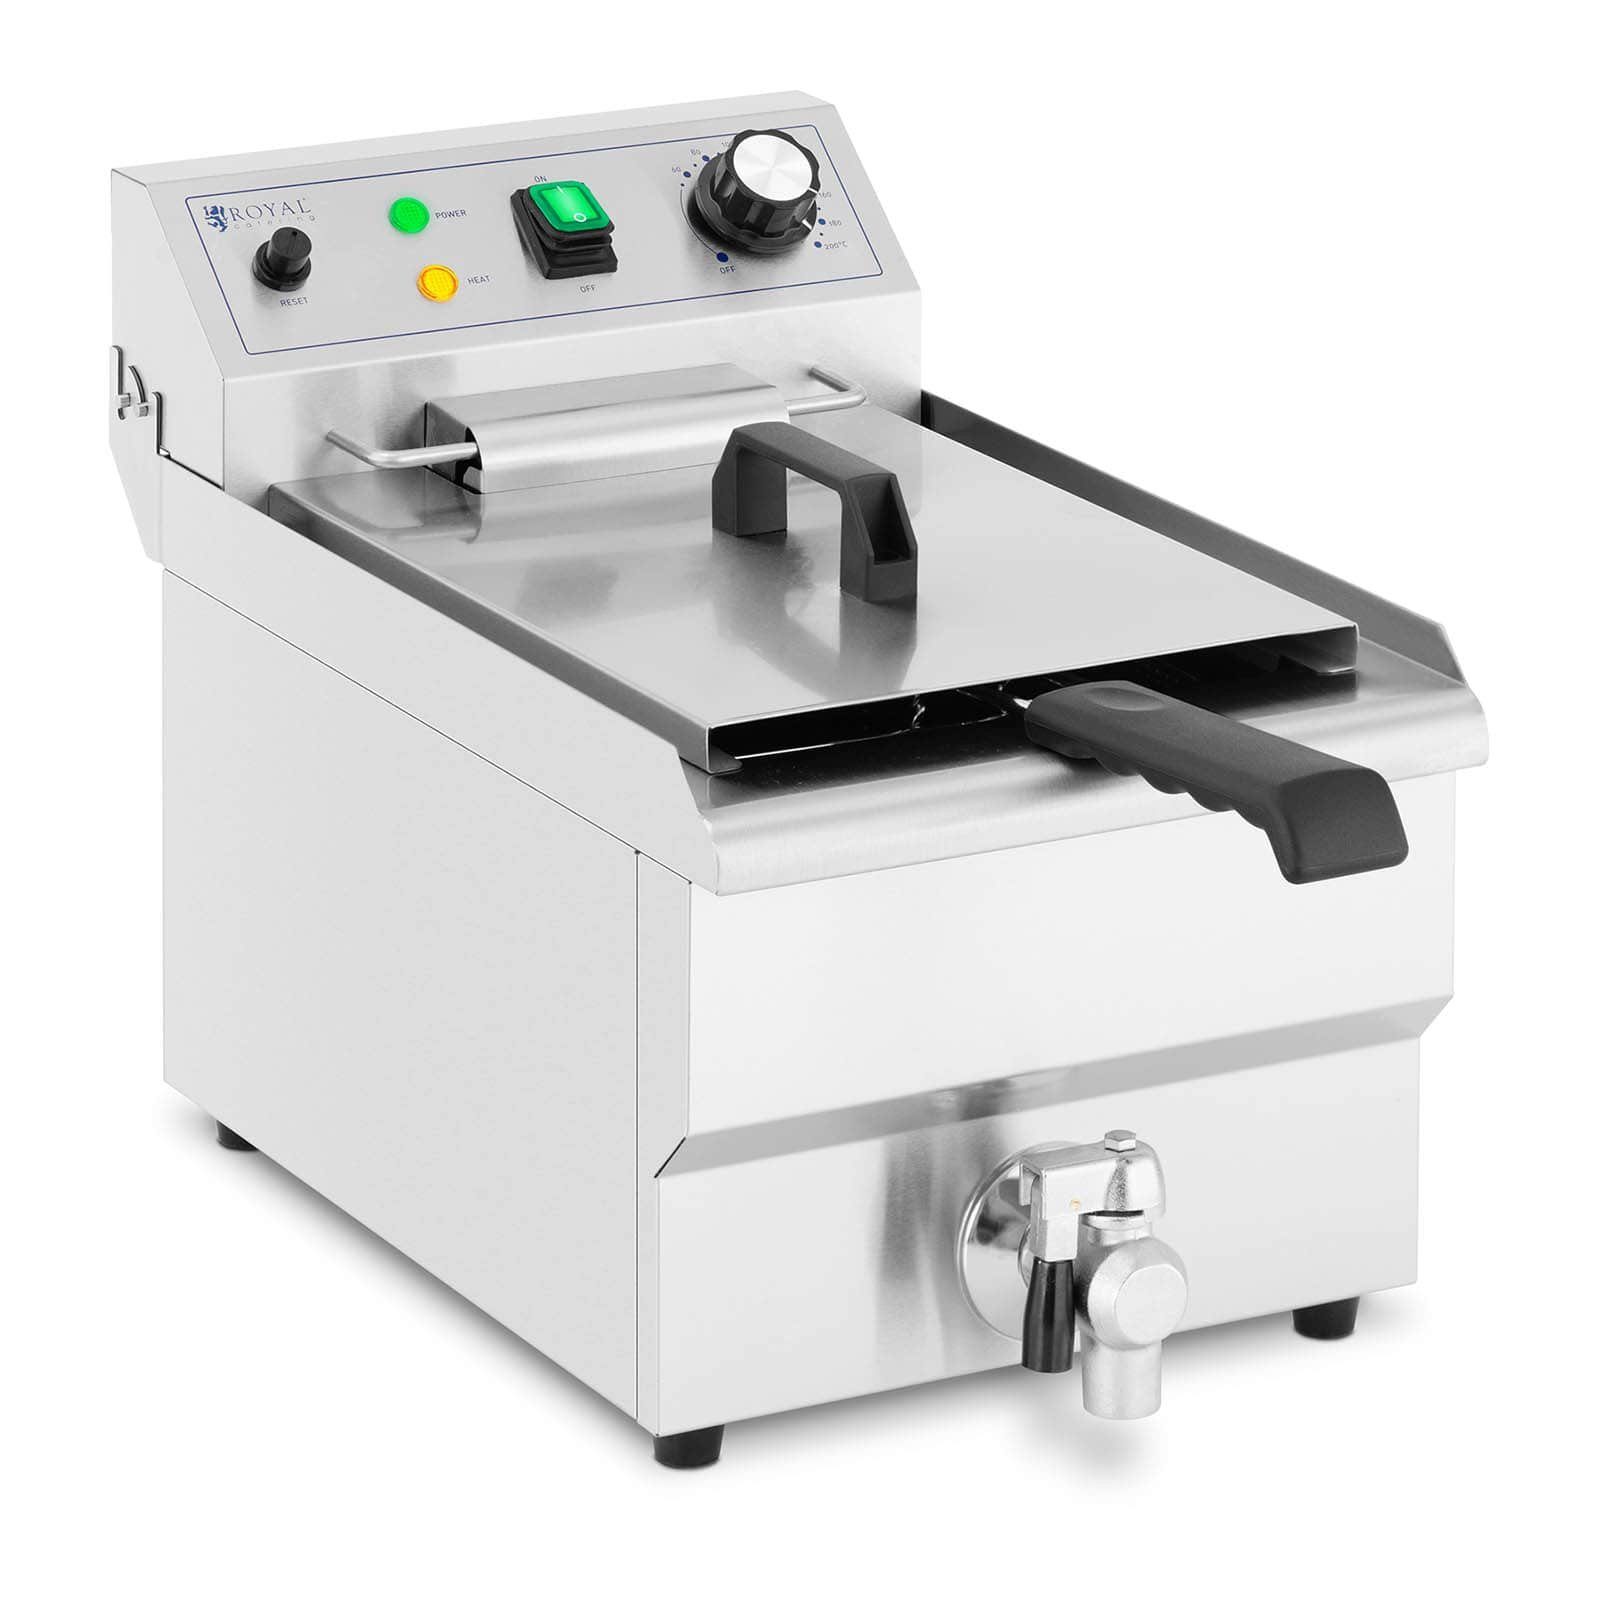 3.000 Elektro-Fritteuse Fritteuse Royal 9 Catering Kaltzonen Gastro 3000 W, W Fritteuse L Fritteuse